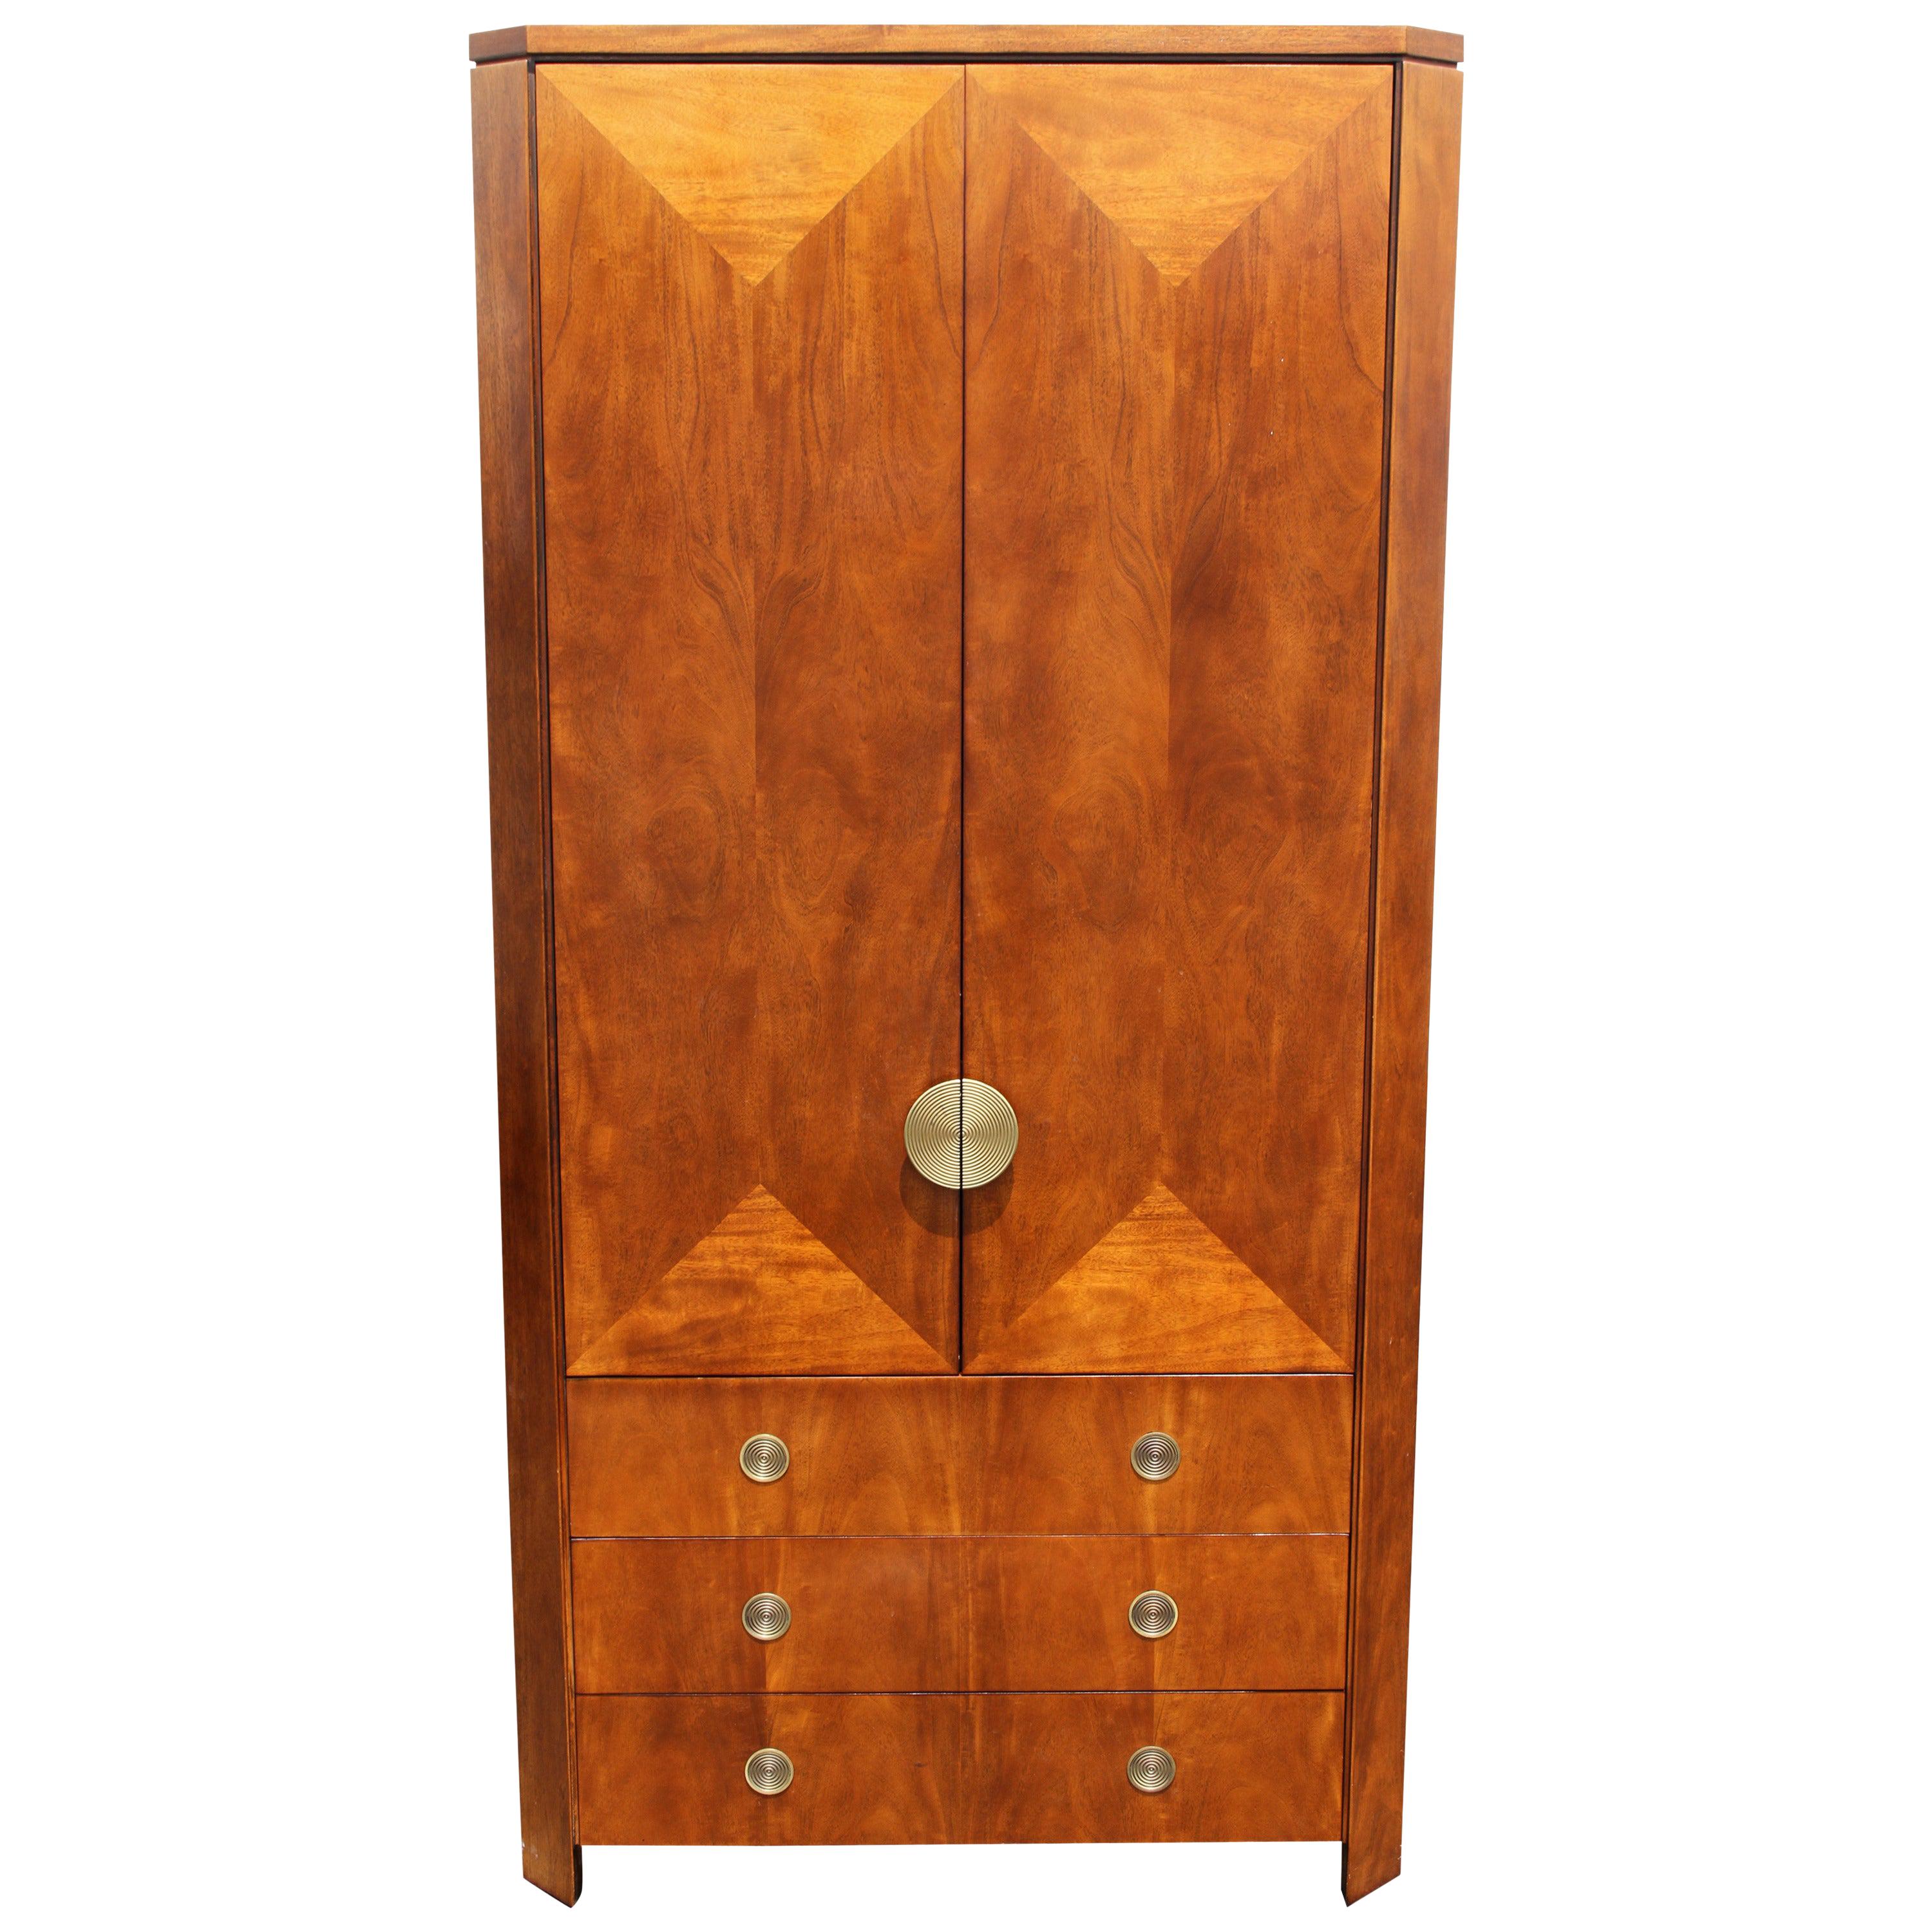 Rare Charles Pfister Skyscraper Armoire for Baker Furniture with Deco Styling